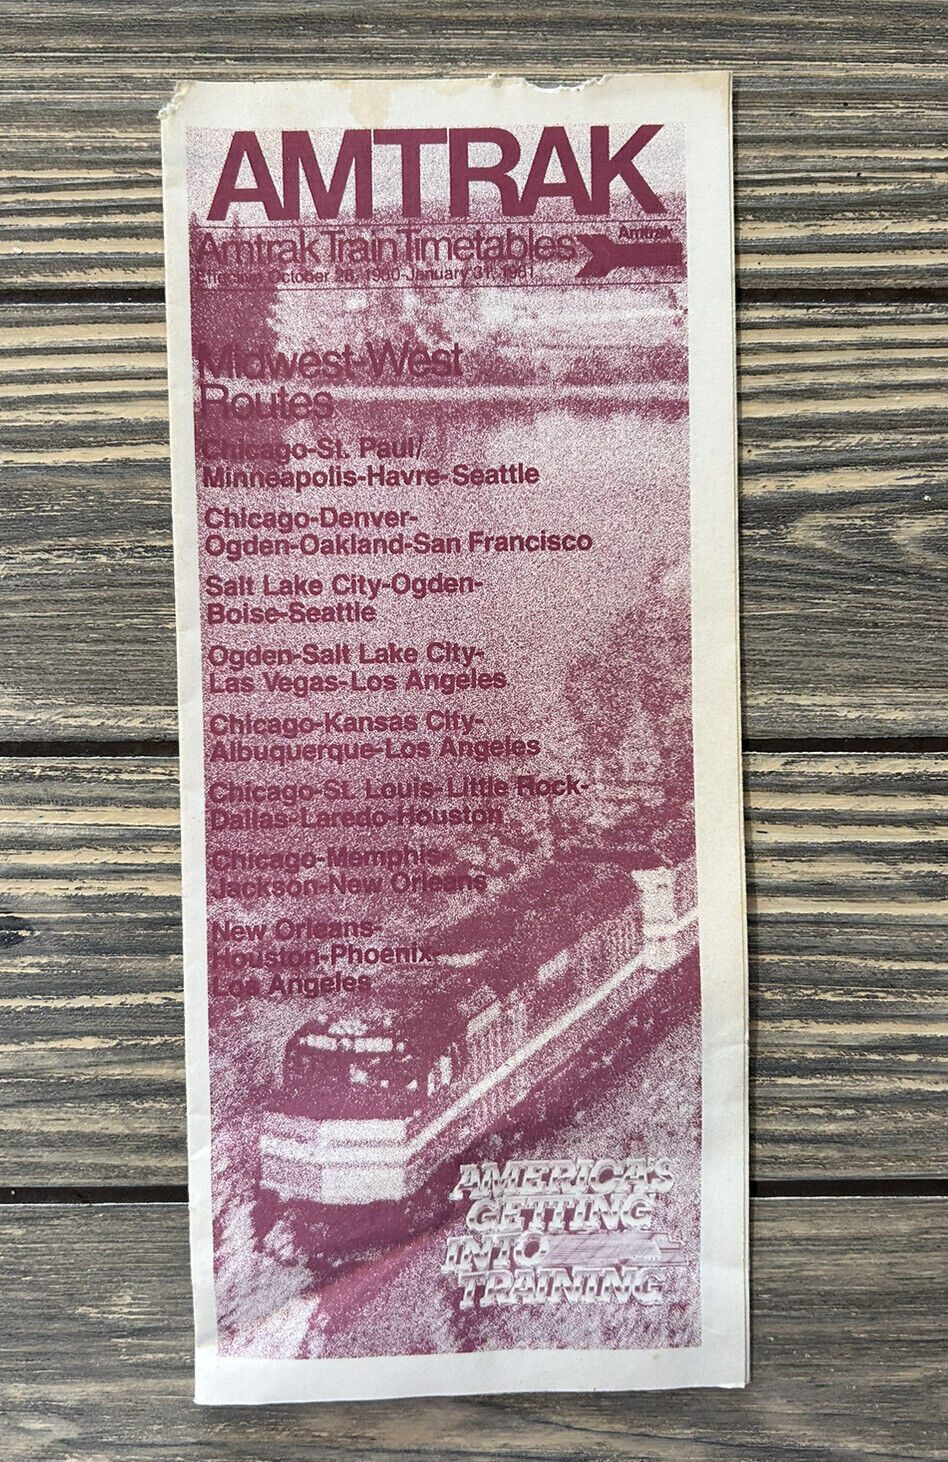 Vintage 1980 October 28 Through January 31 1981 Amtrak Train Timetable Schedule